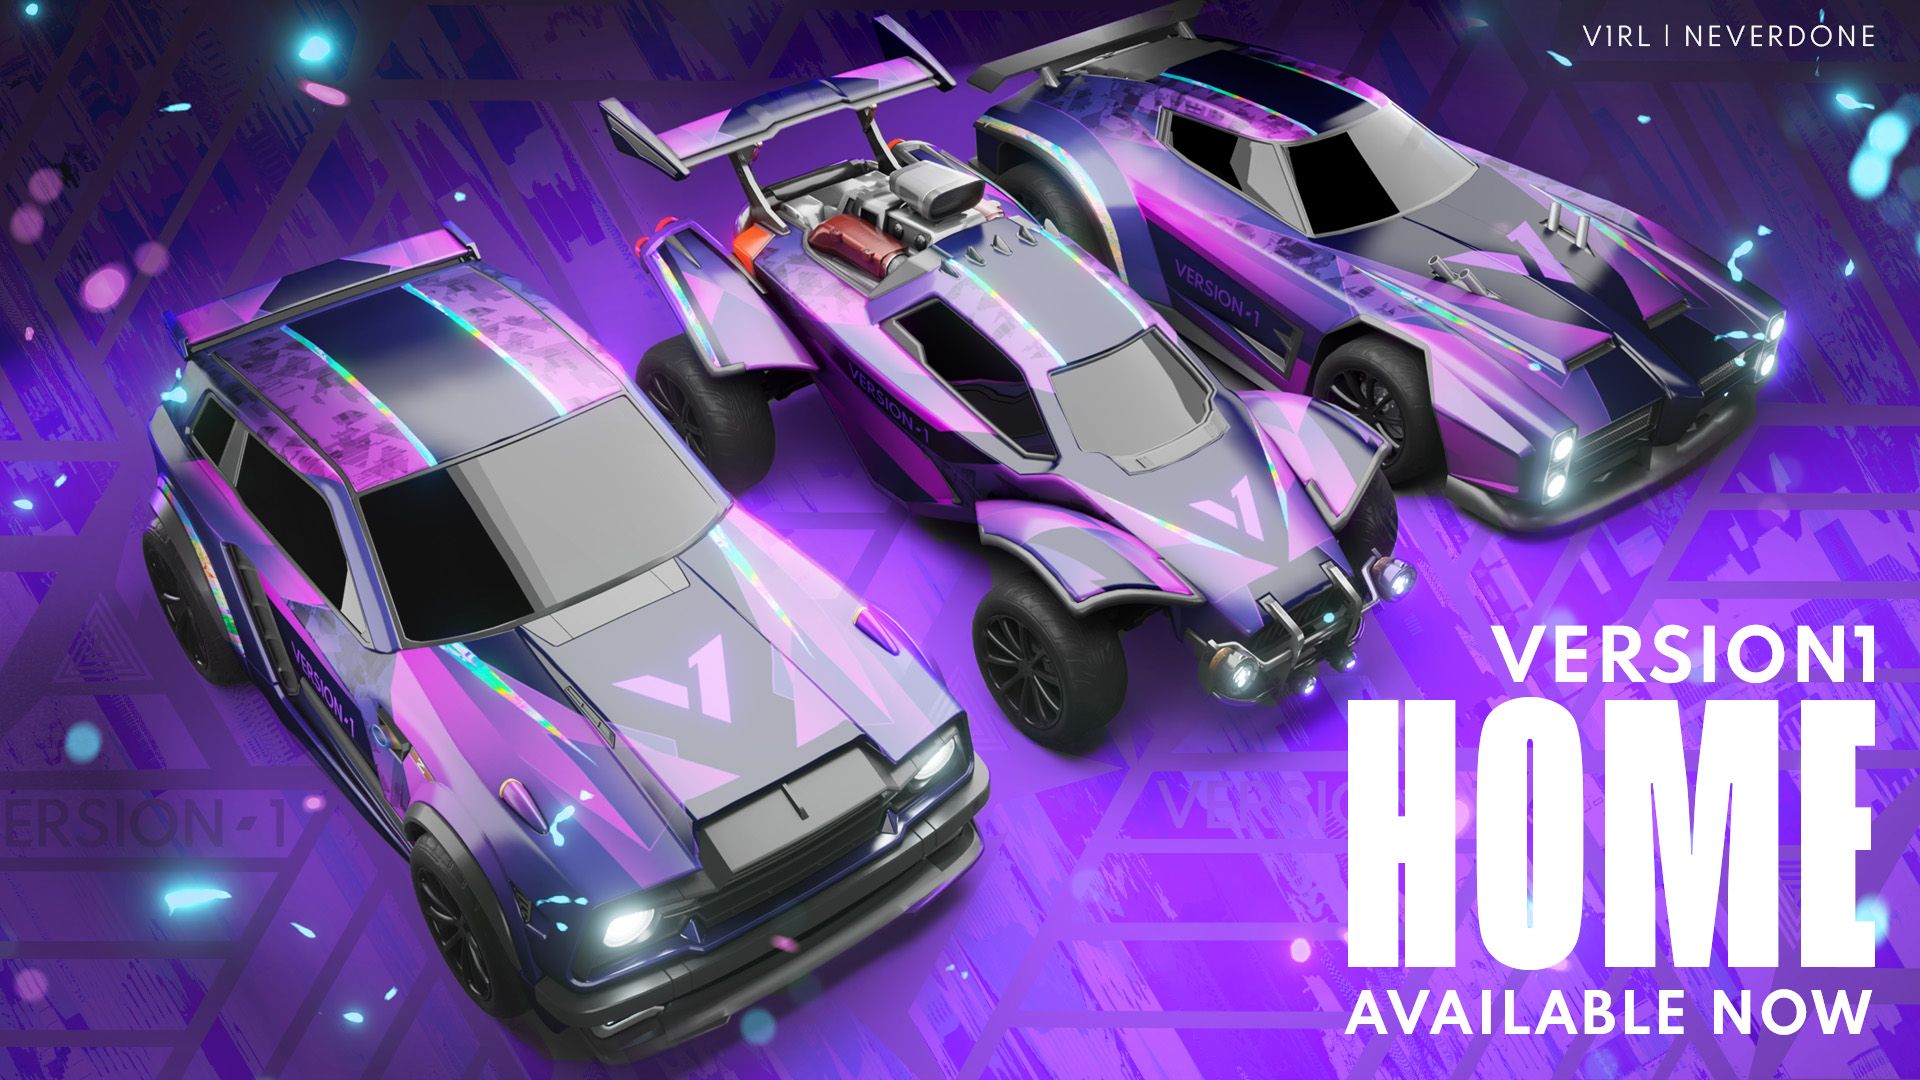 Version1 Rocket League decal equipped on the Fennec, Octane, and Dominus. All three cars have the Home version of the V1 Rocket League decal equipped.